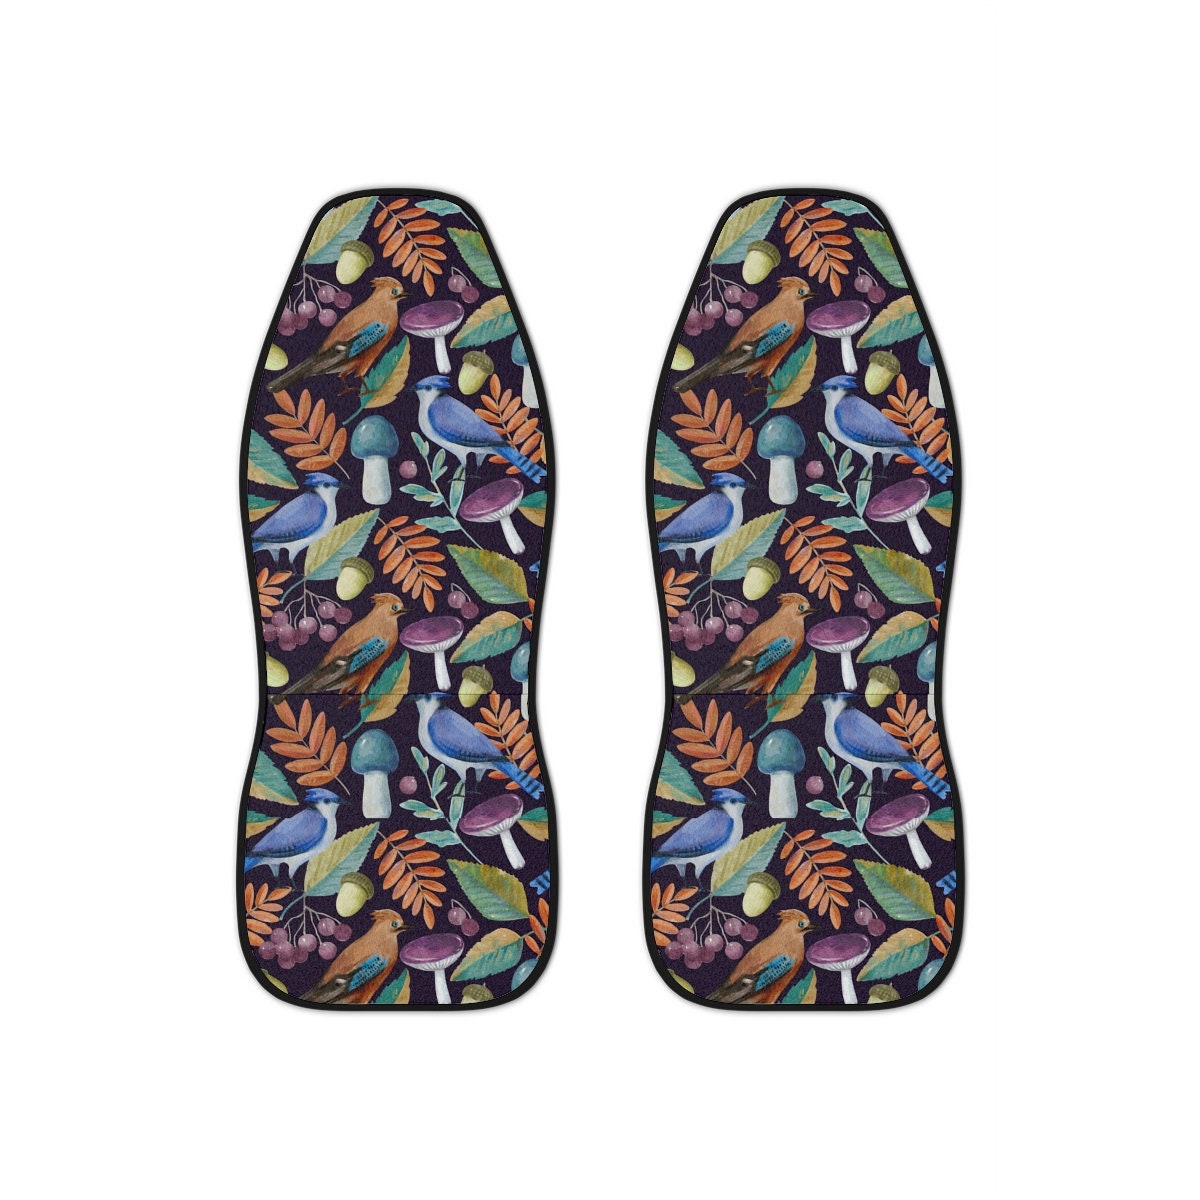 Seat Covers for Cars, Vintage Mushroom Boho Car Seat Cover, Cute Hippie Car Accessories for Women, Bohemian Universal Vehicle Seat Protector